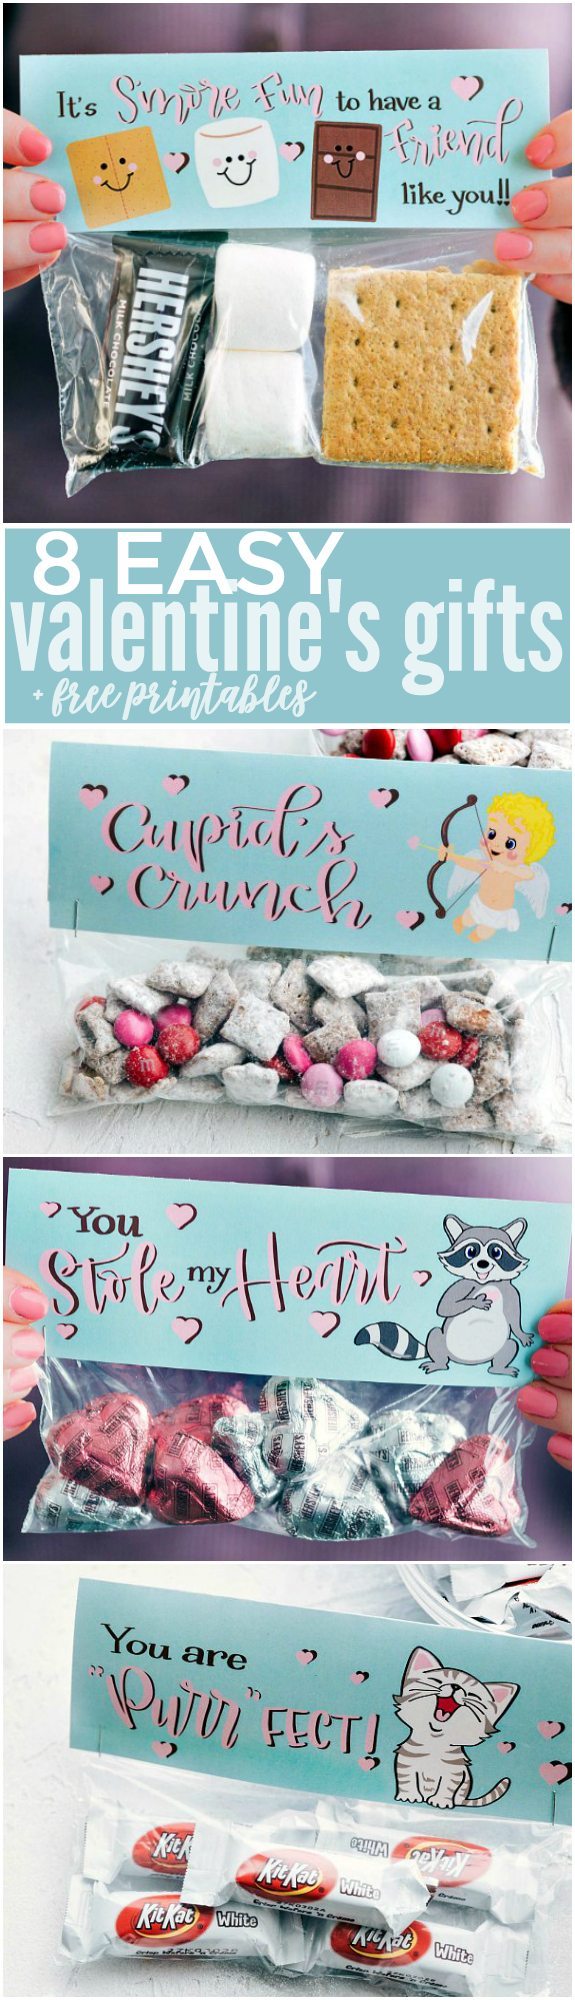 The CUTEST Valentine's Day Gifts -- so easy to make and FREE PRINTABLE bag toppers! via chelseasmessyapron.com | #valentines #bagtopper #easy #quick #free #printable #bag #topper #treat #dessert #smore #beary #nice #treat #candy #snack